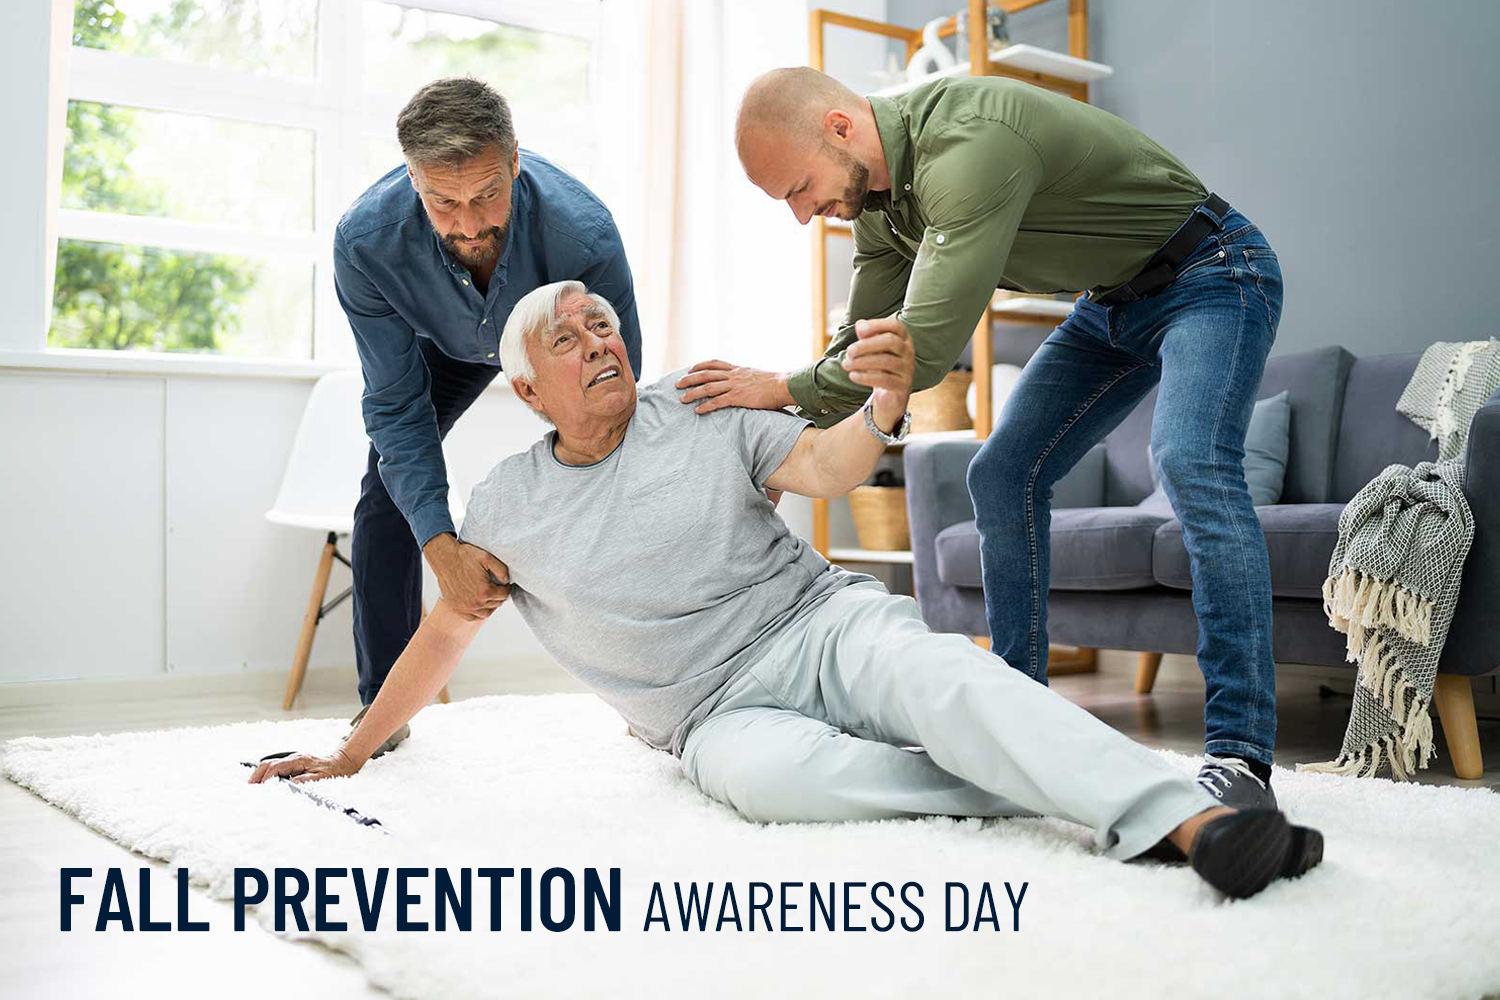 Fall prevention awareness day